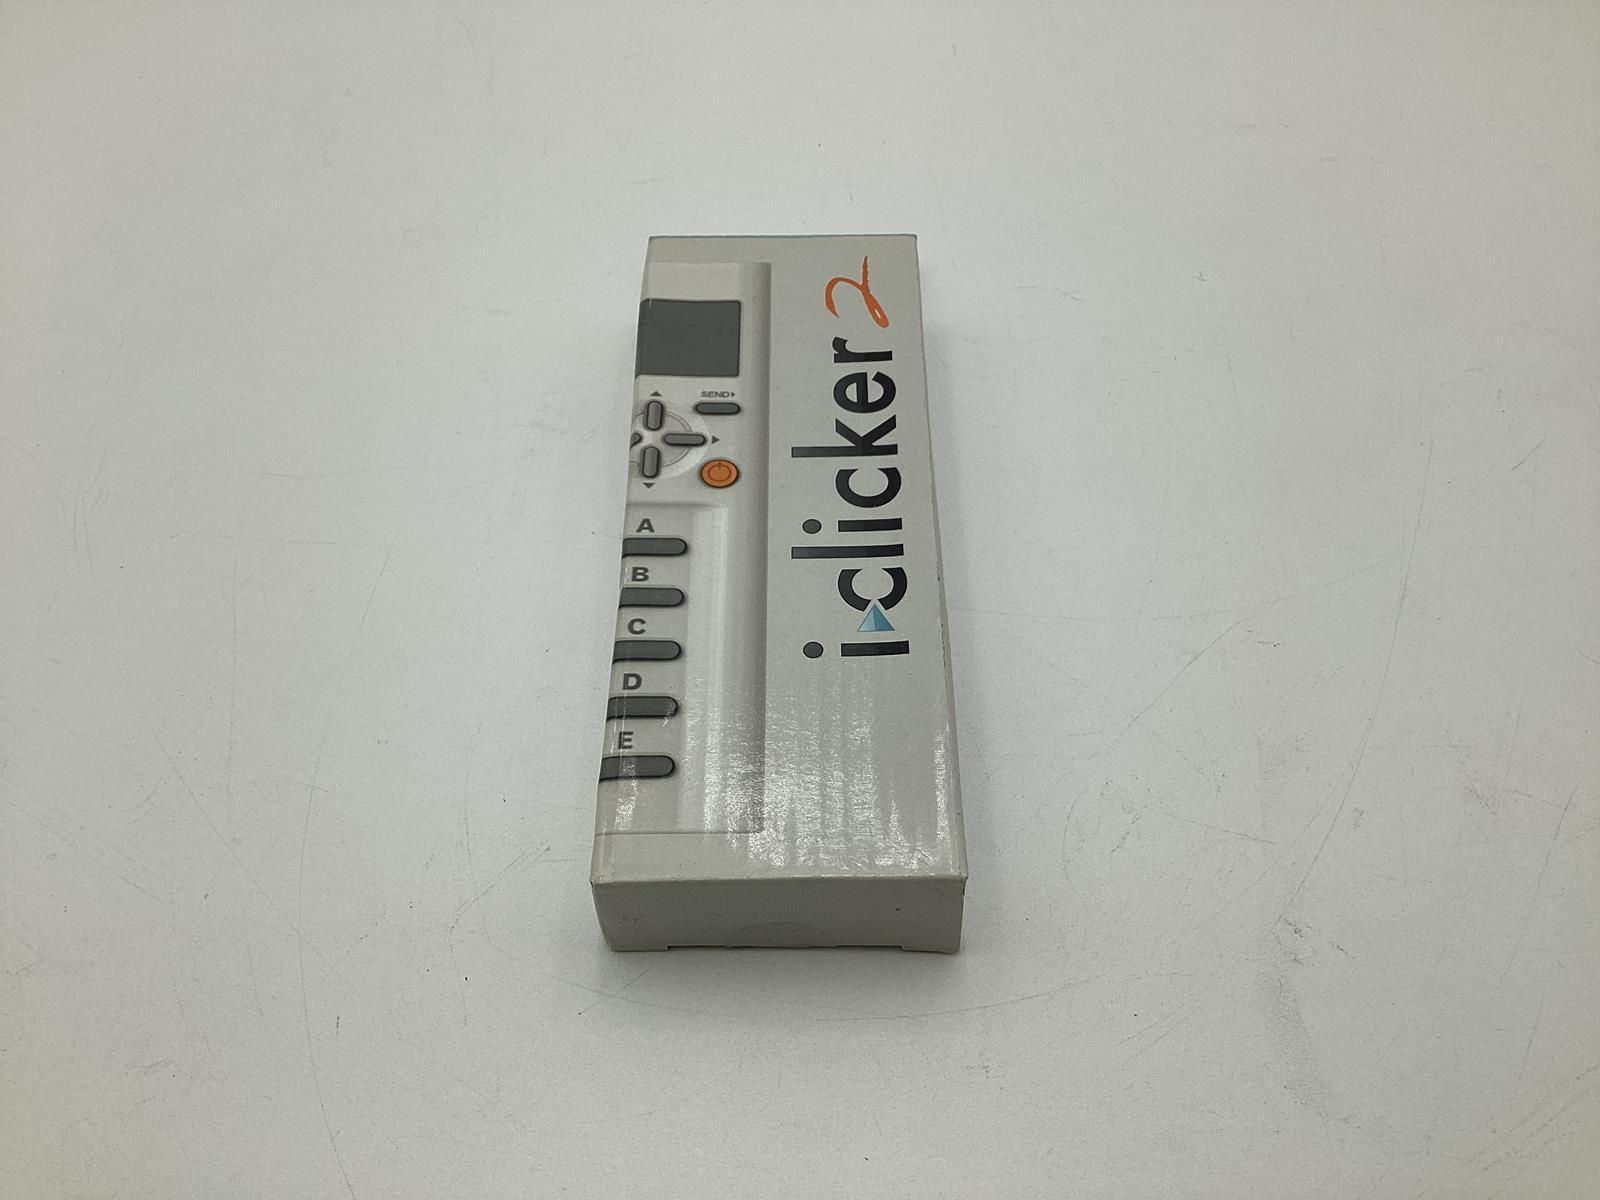 ICLICKER 2 Student Remote (2nd Edition) Brand New